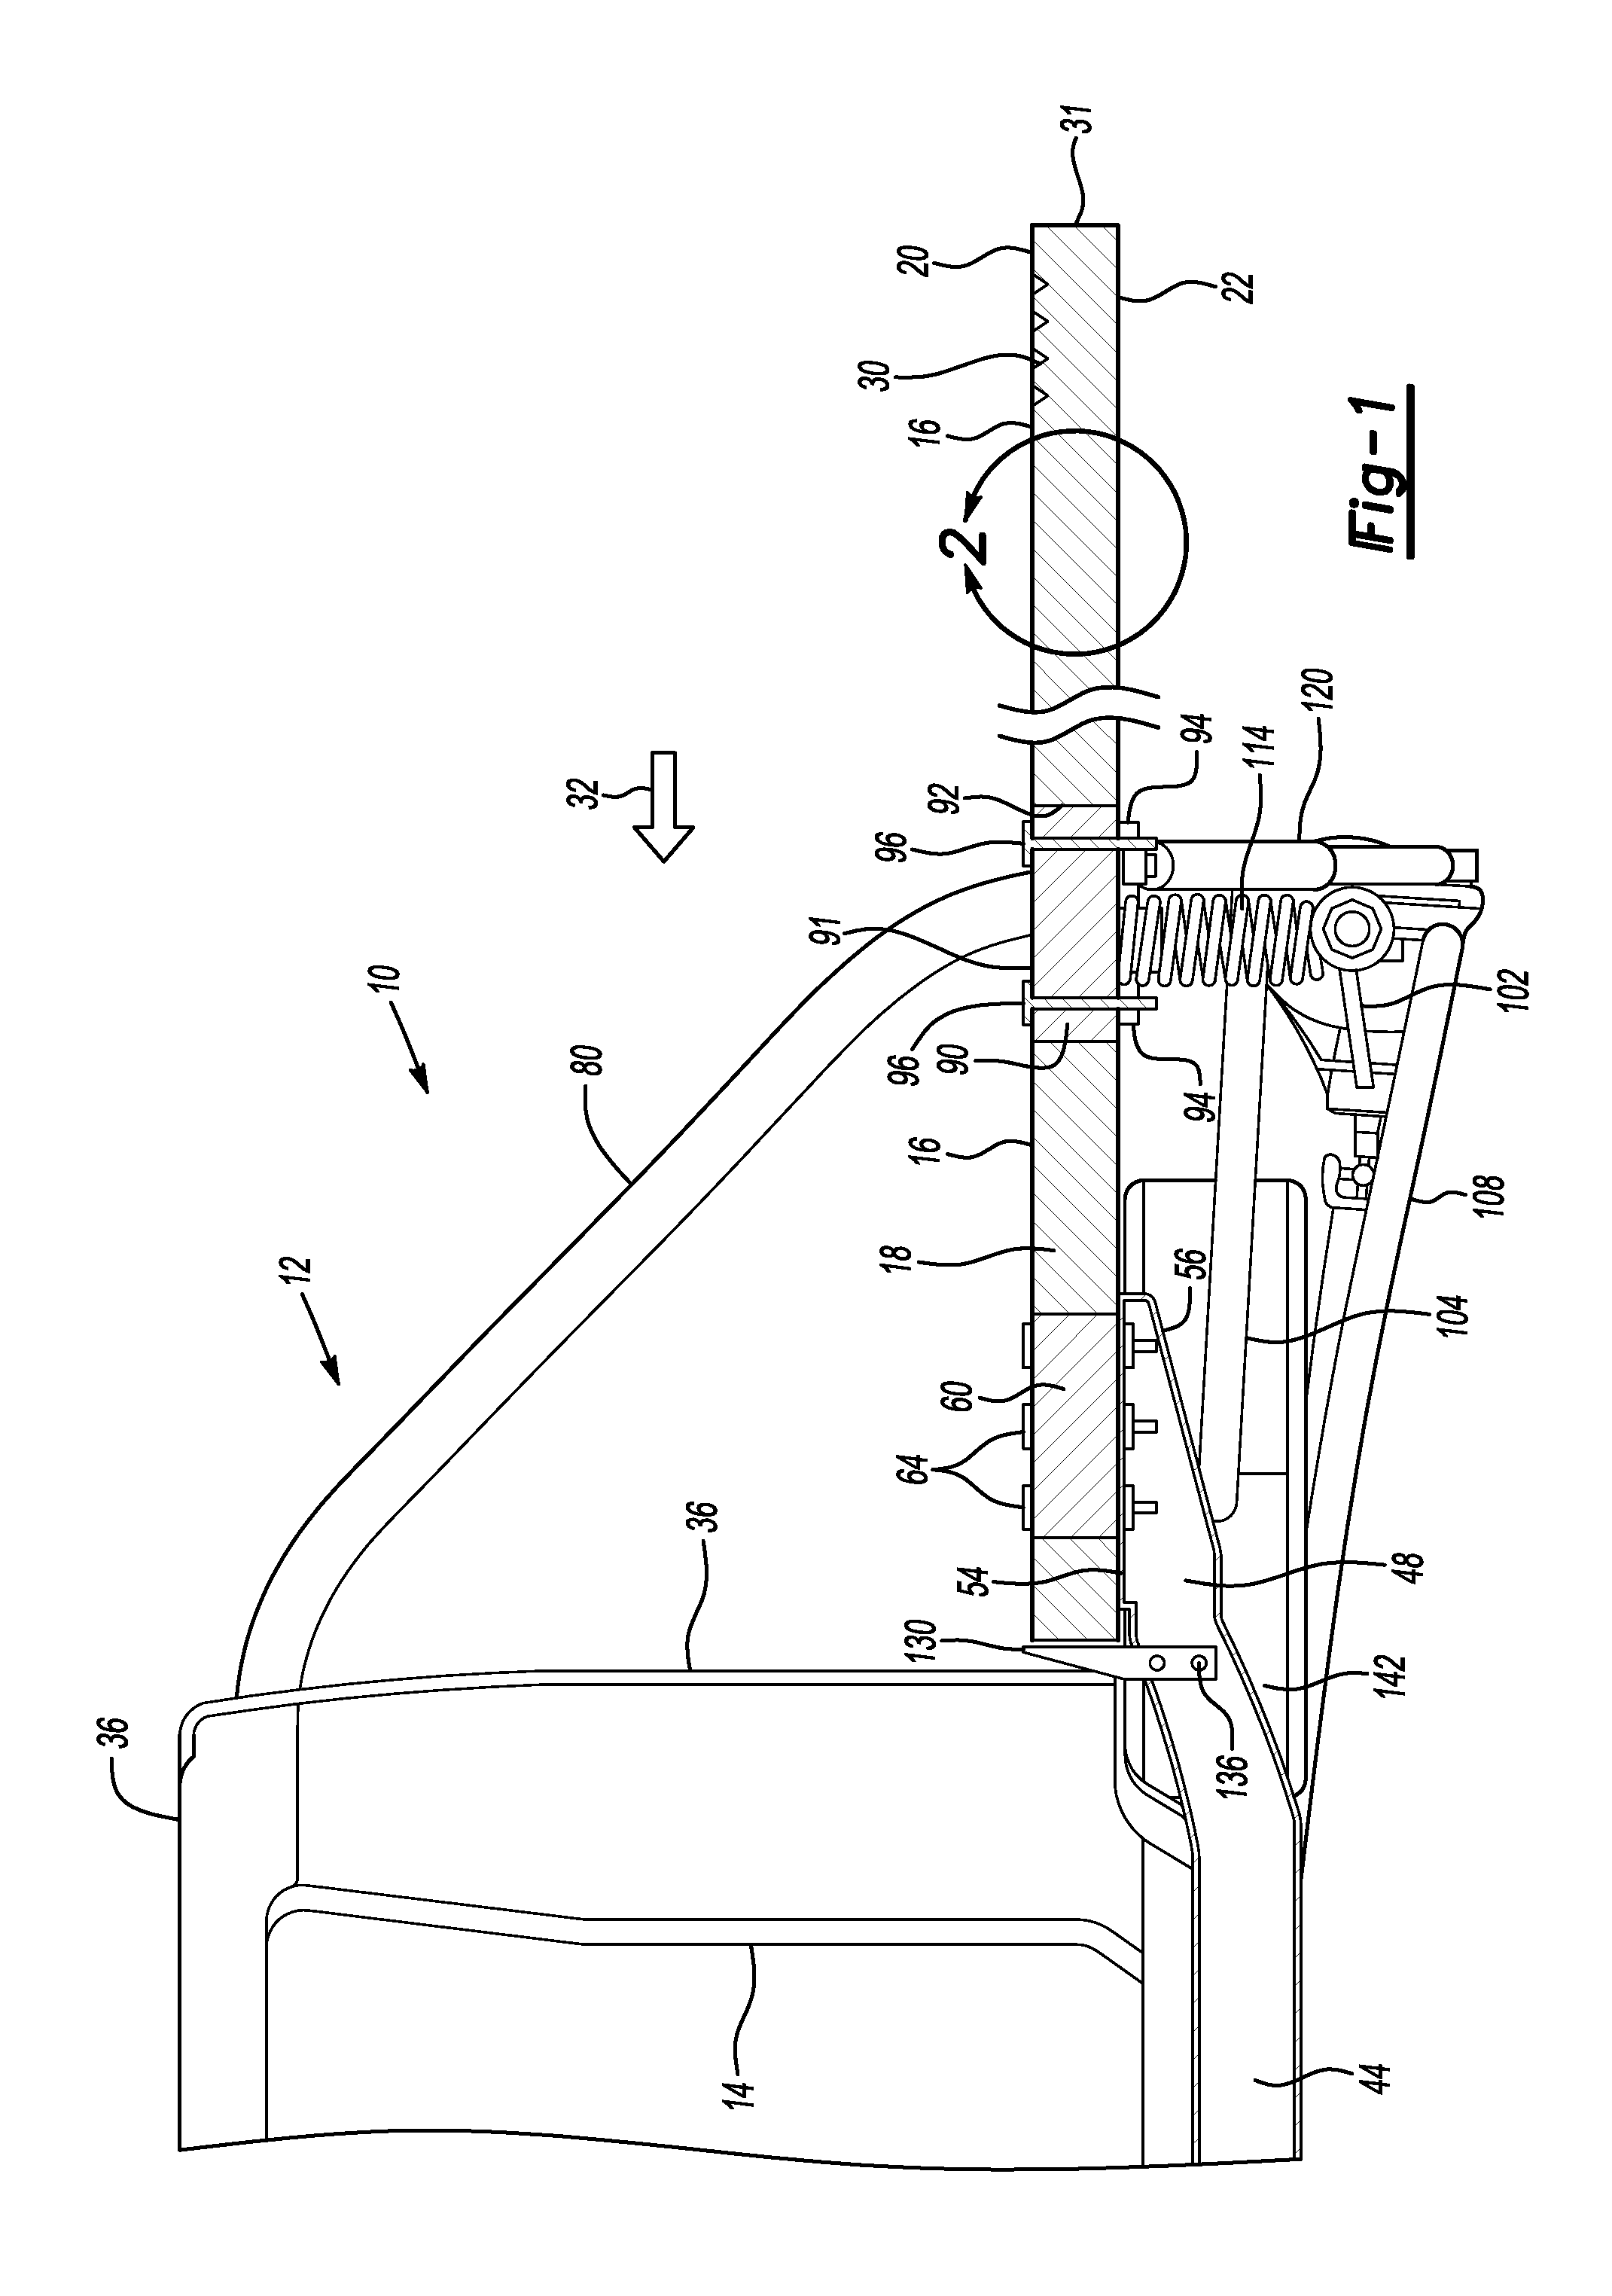 Vehicle with composite structural bed